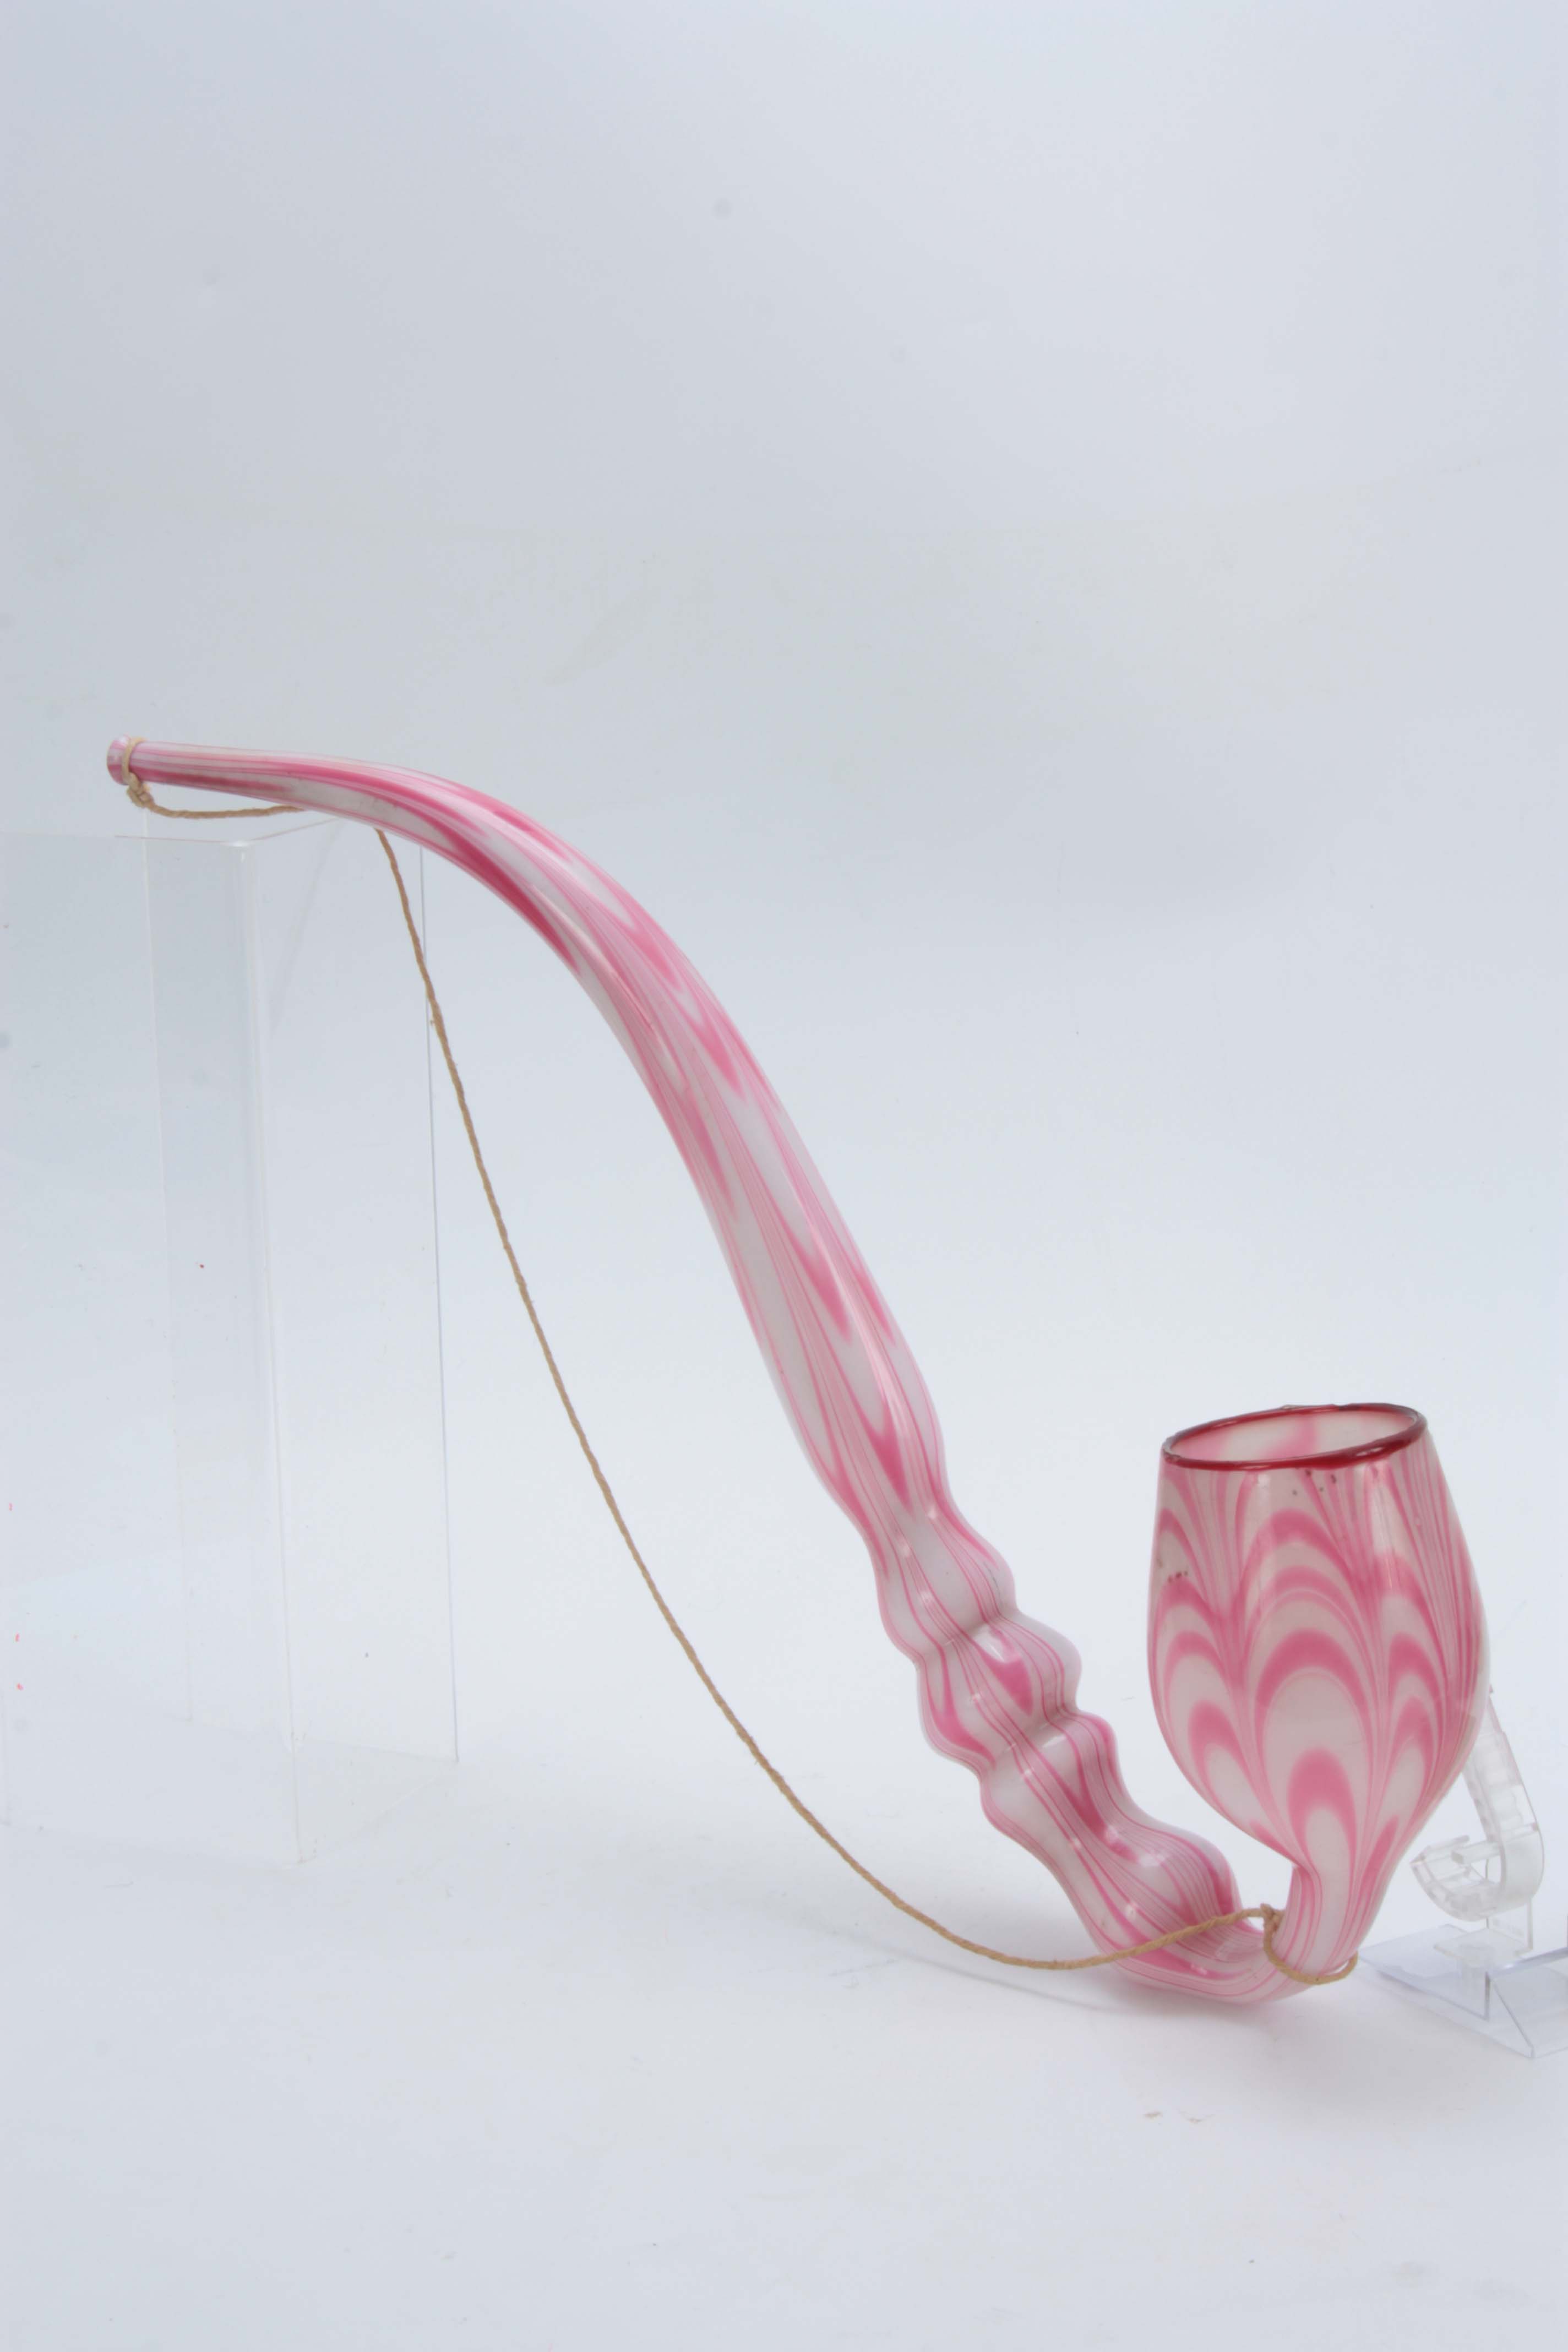 A LARGE 19TH CENTURY STOURBRIDGE GLASS PIPE of twisted pink and opaque design 50cm overall. - Image 6 of 10